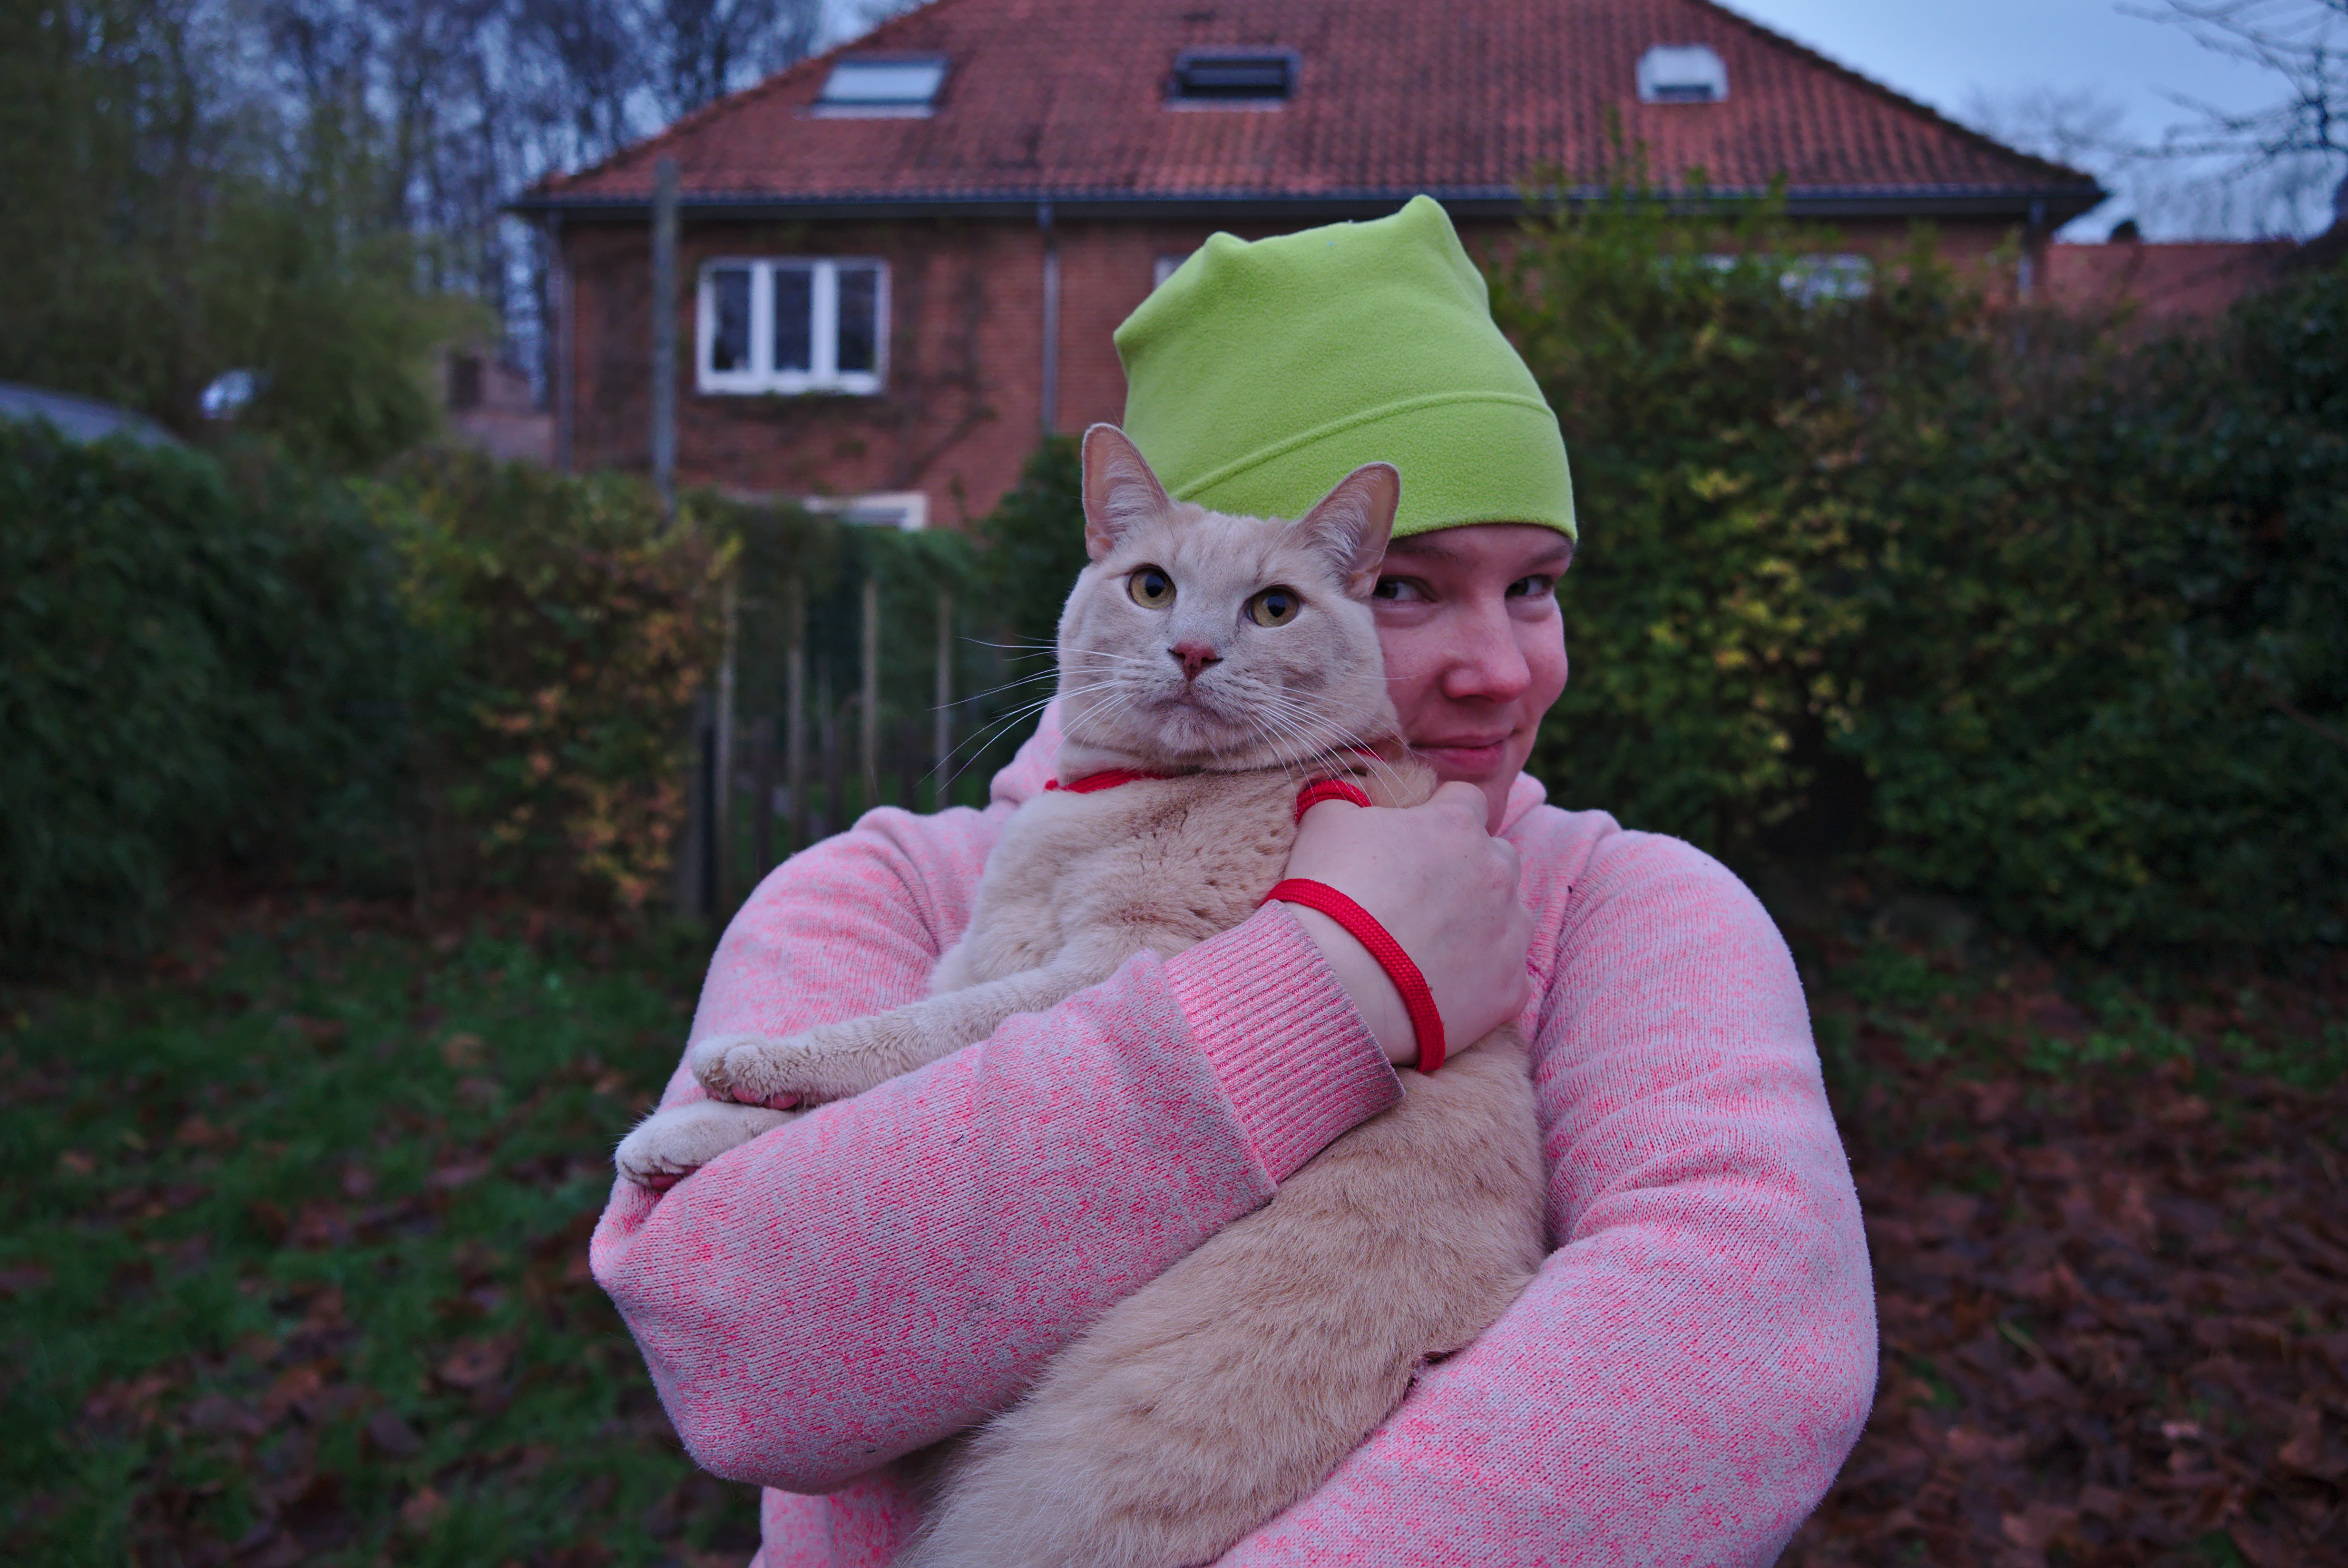 Cat in a harness being held by a pink human in Auderghem, Belgium